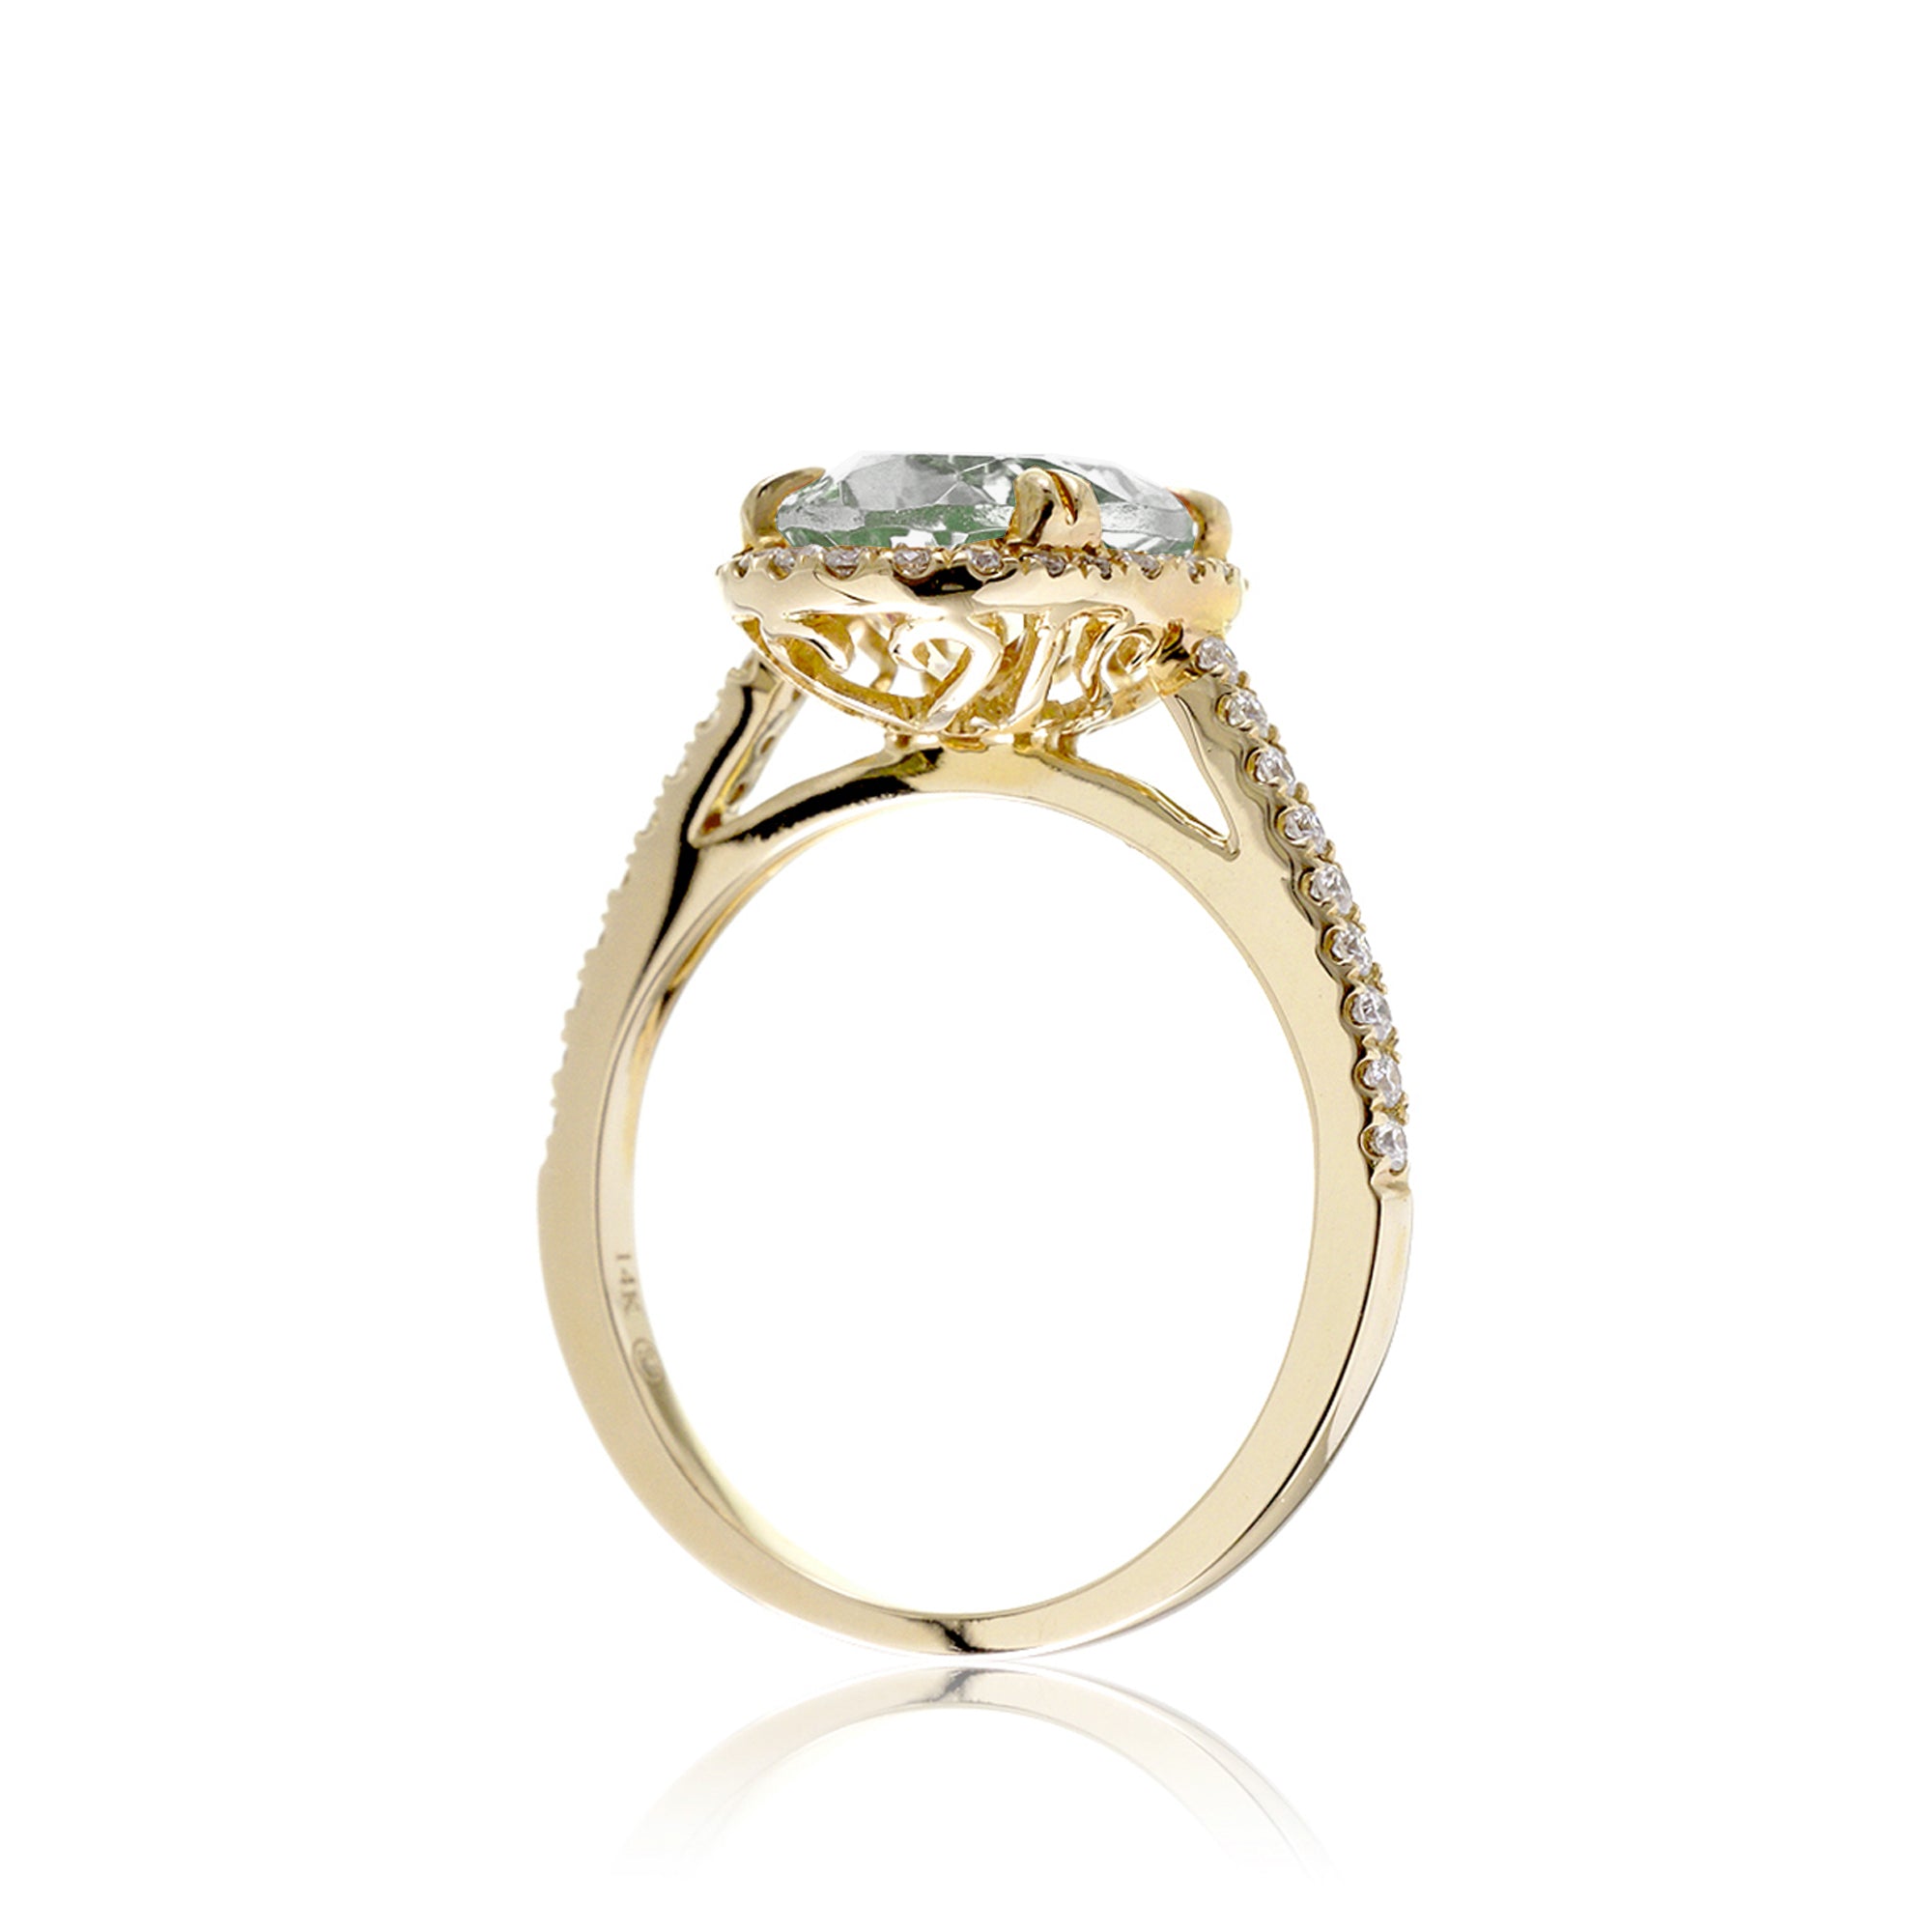 The Signature Oval Green Sapphire Ring (Lab-Grown)